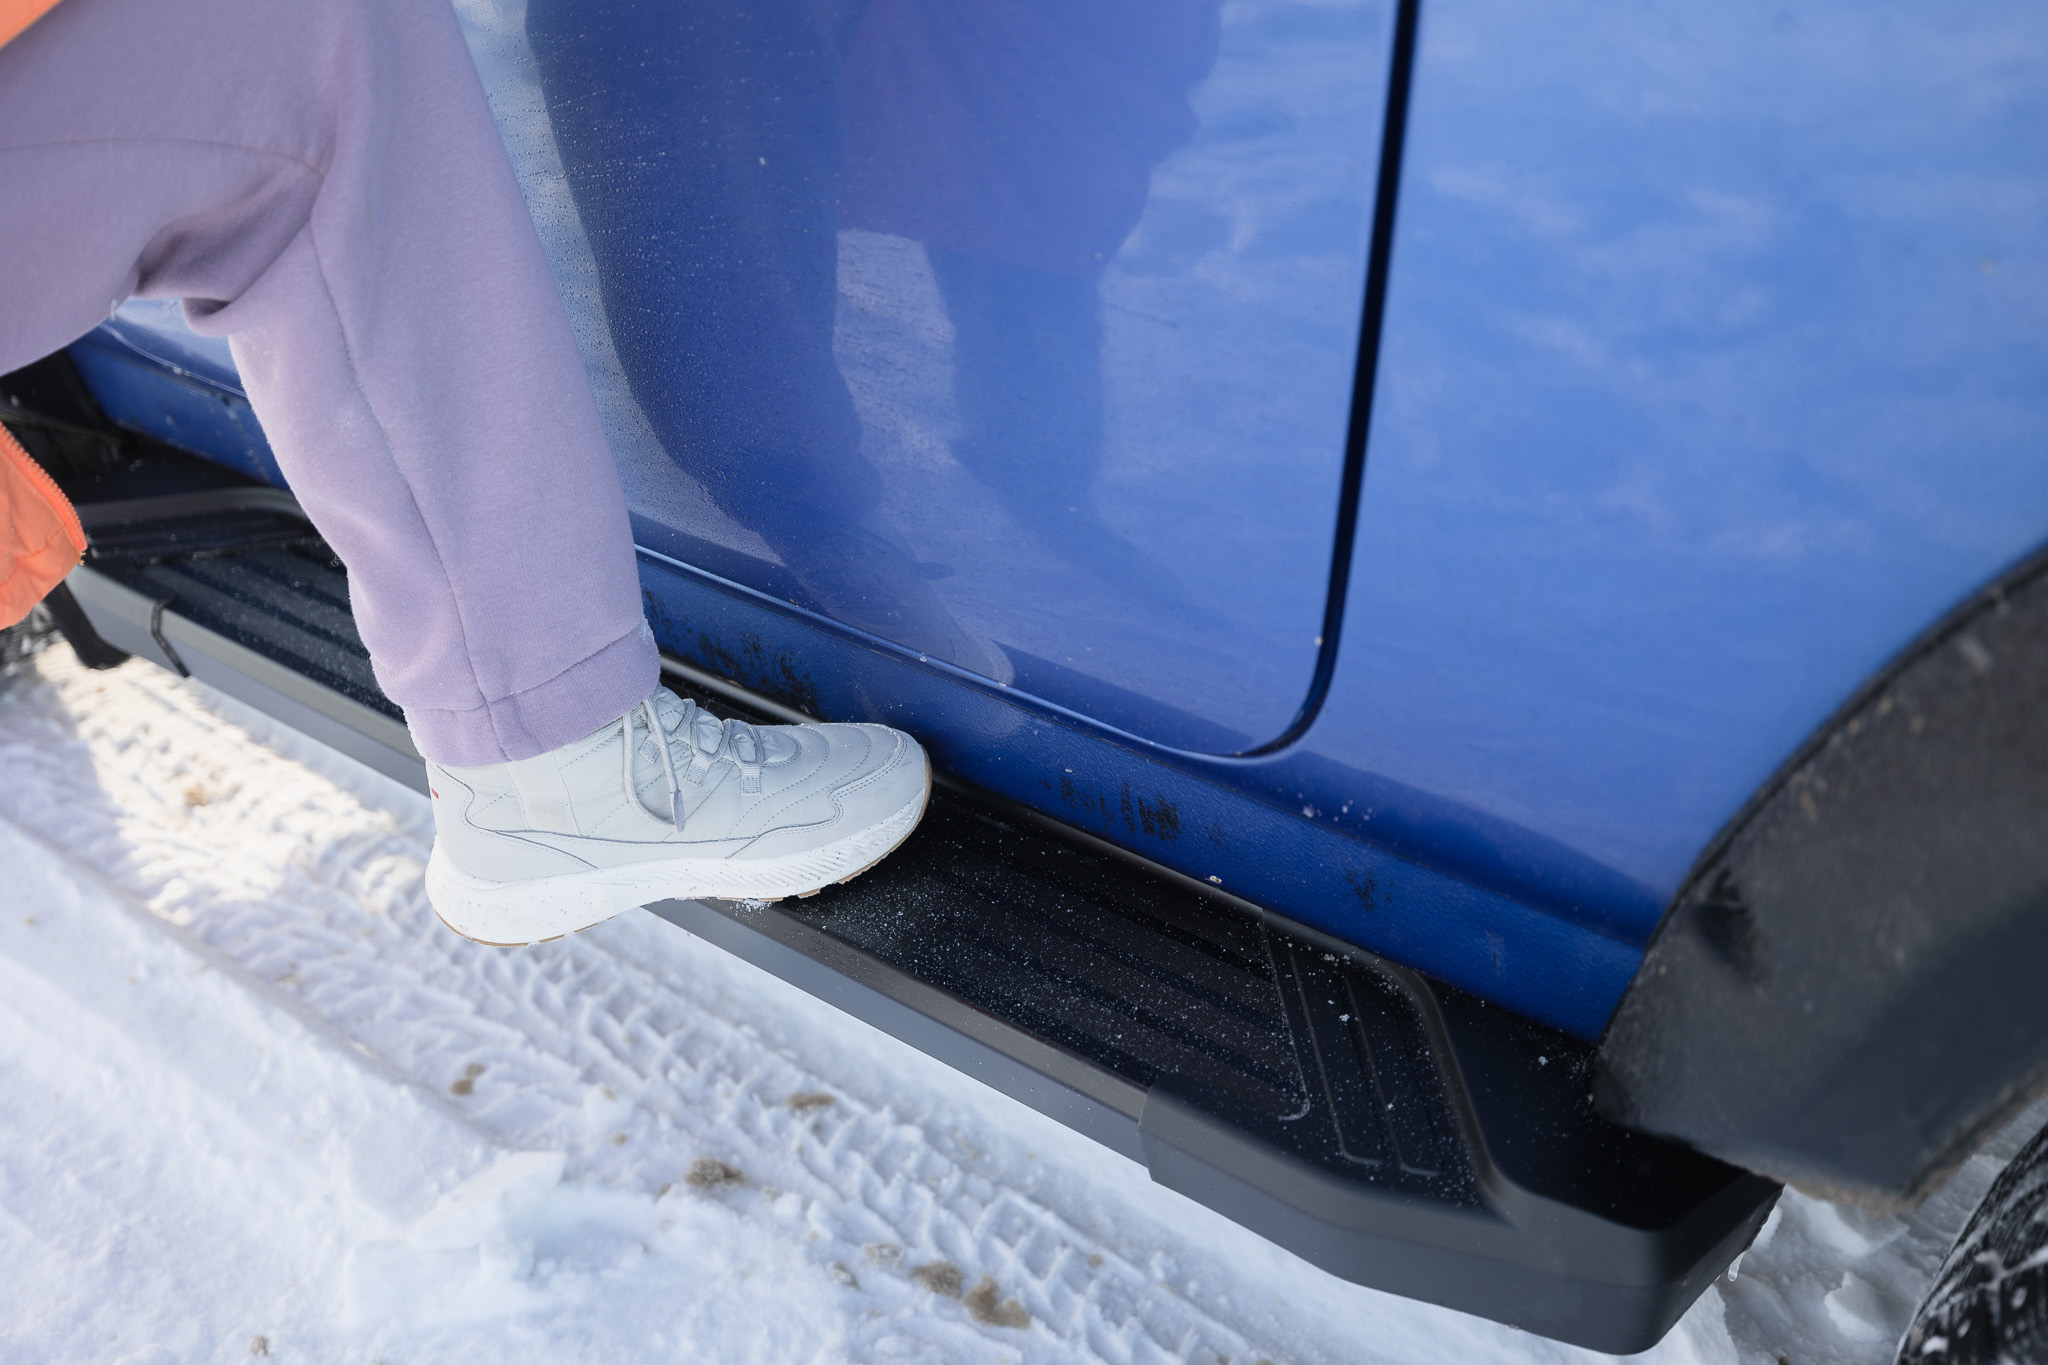 Our sidesteps boast a state-of-the-art slip-resistant surface